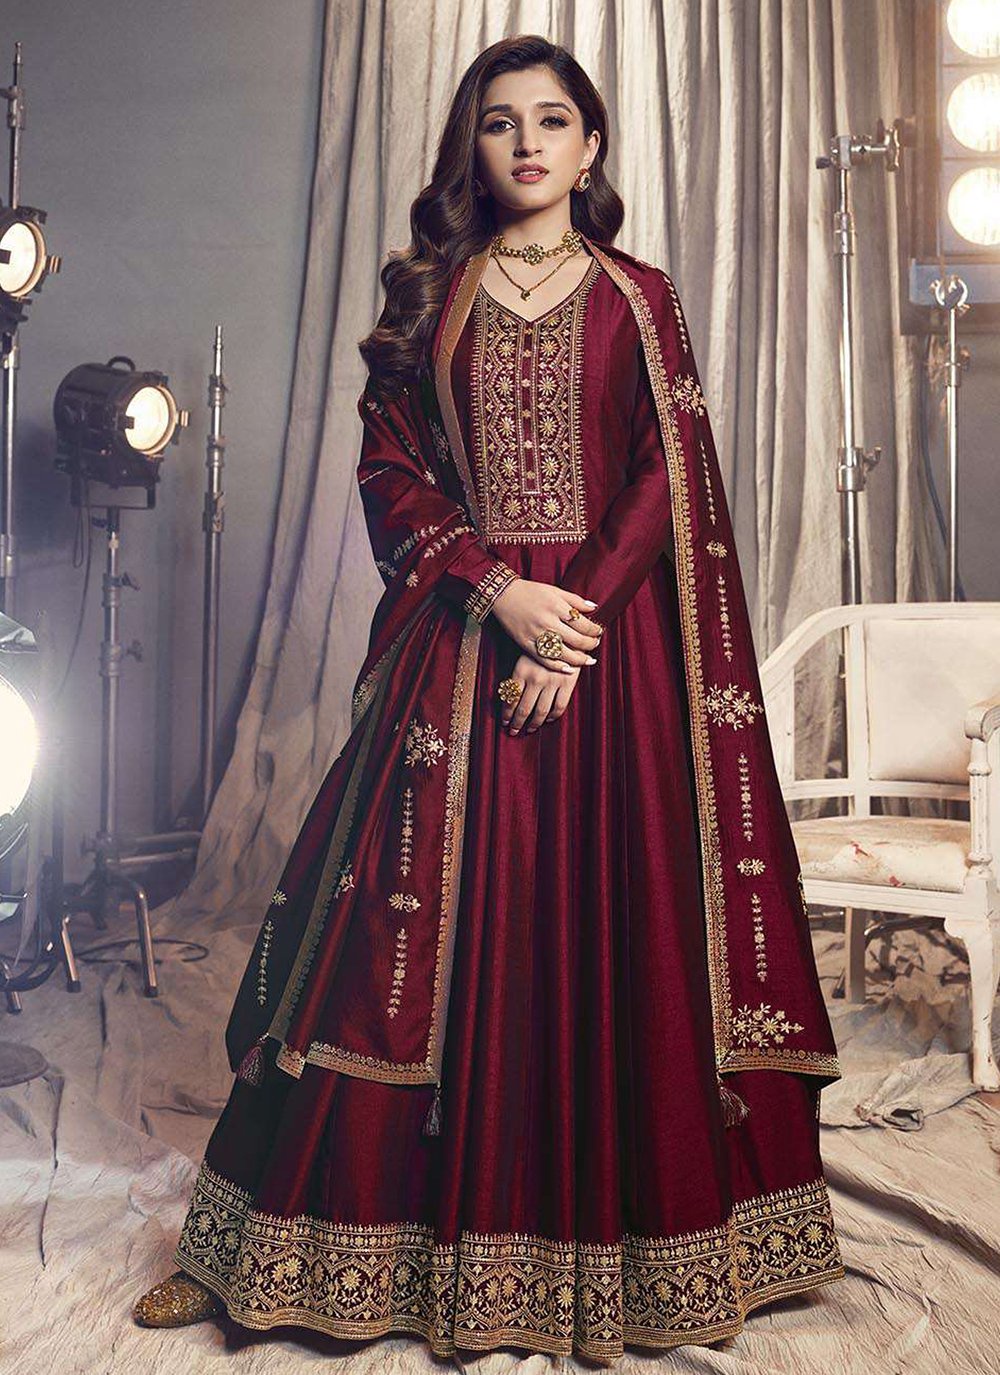 Punjabi Party Wear Suits that Fuse Tradition with Trend!